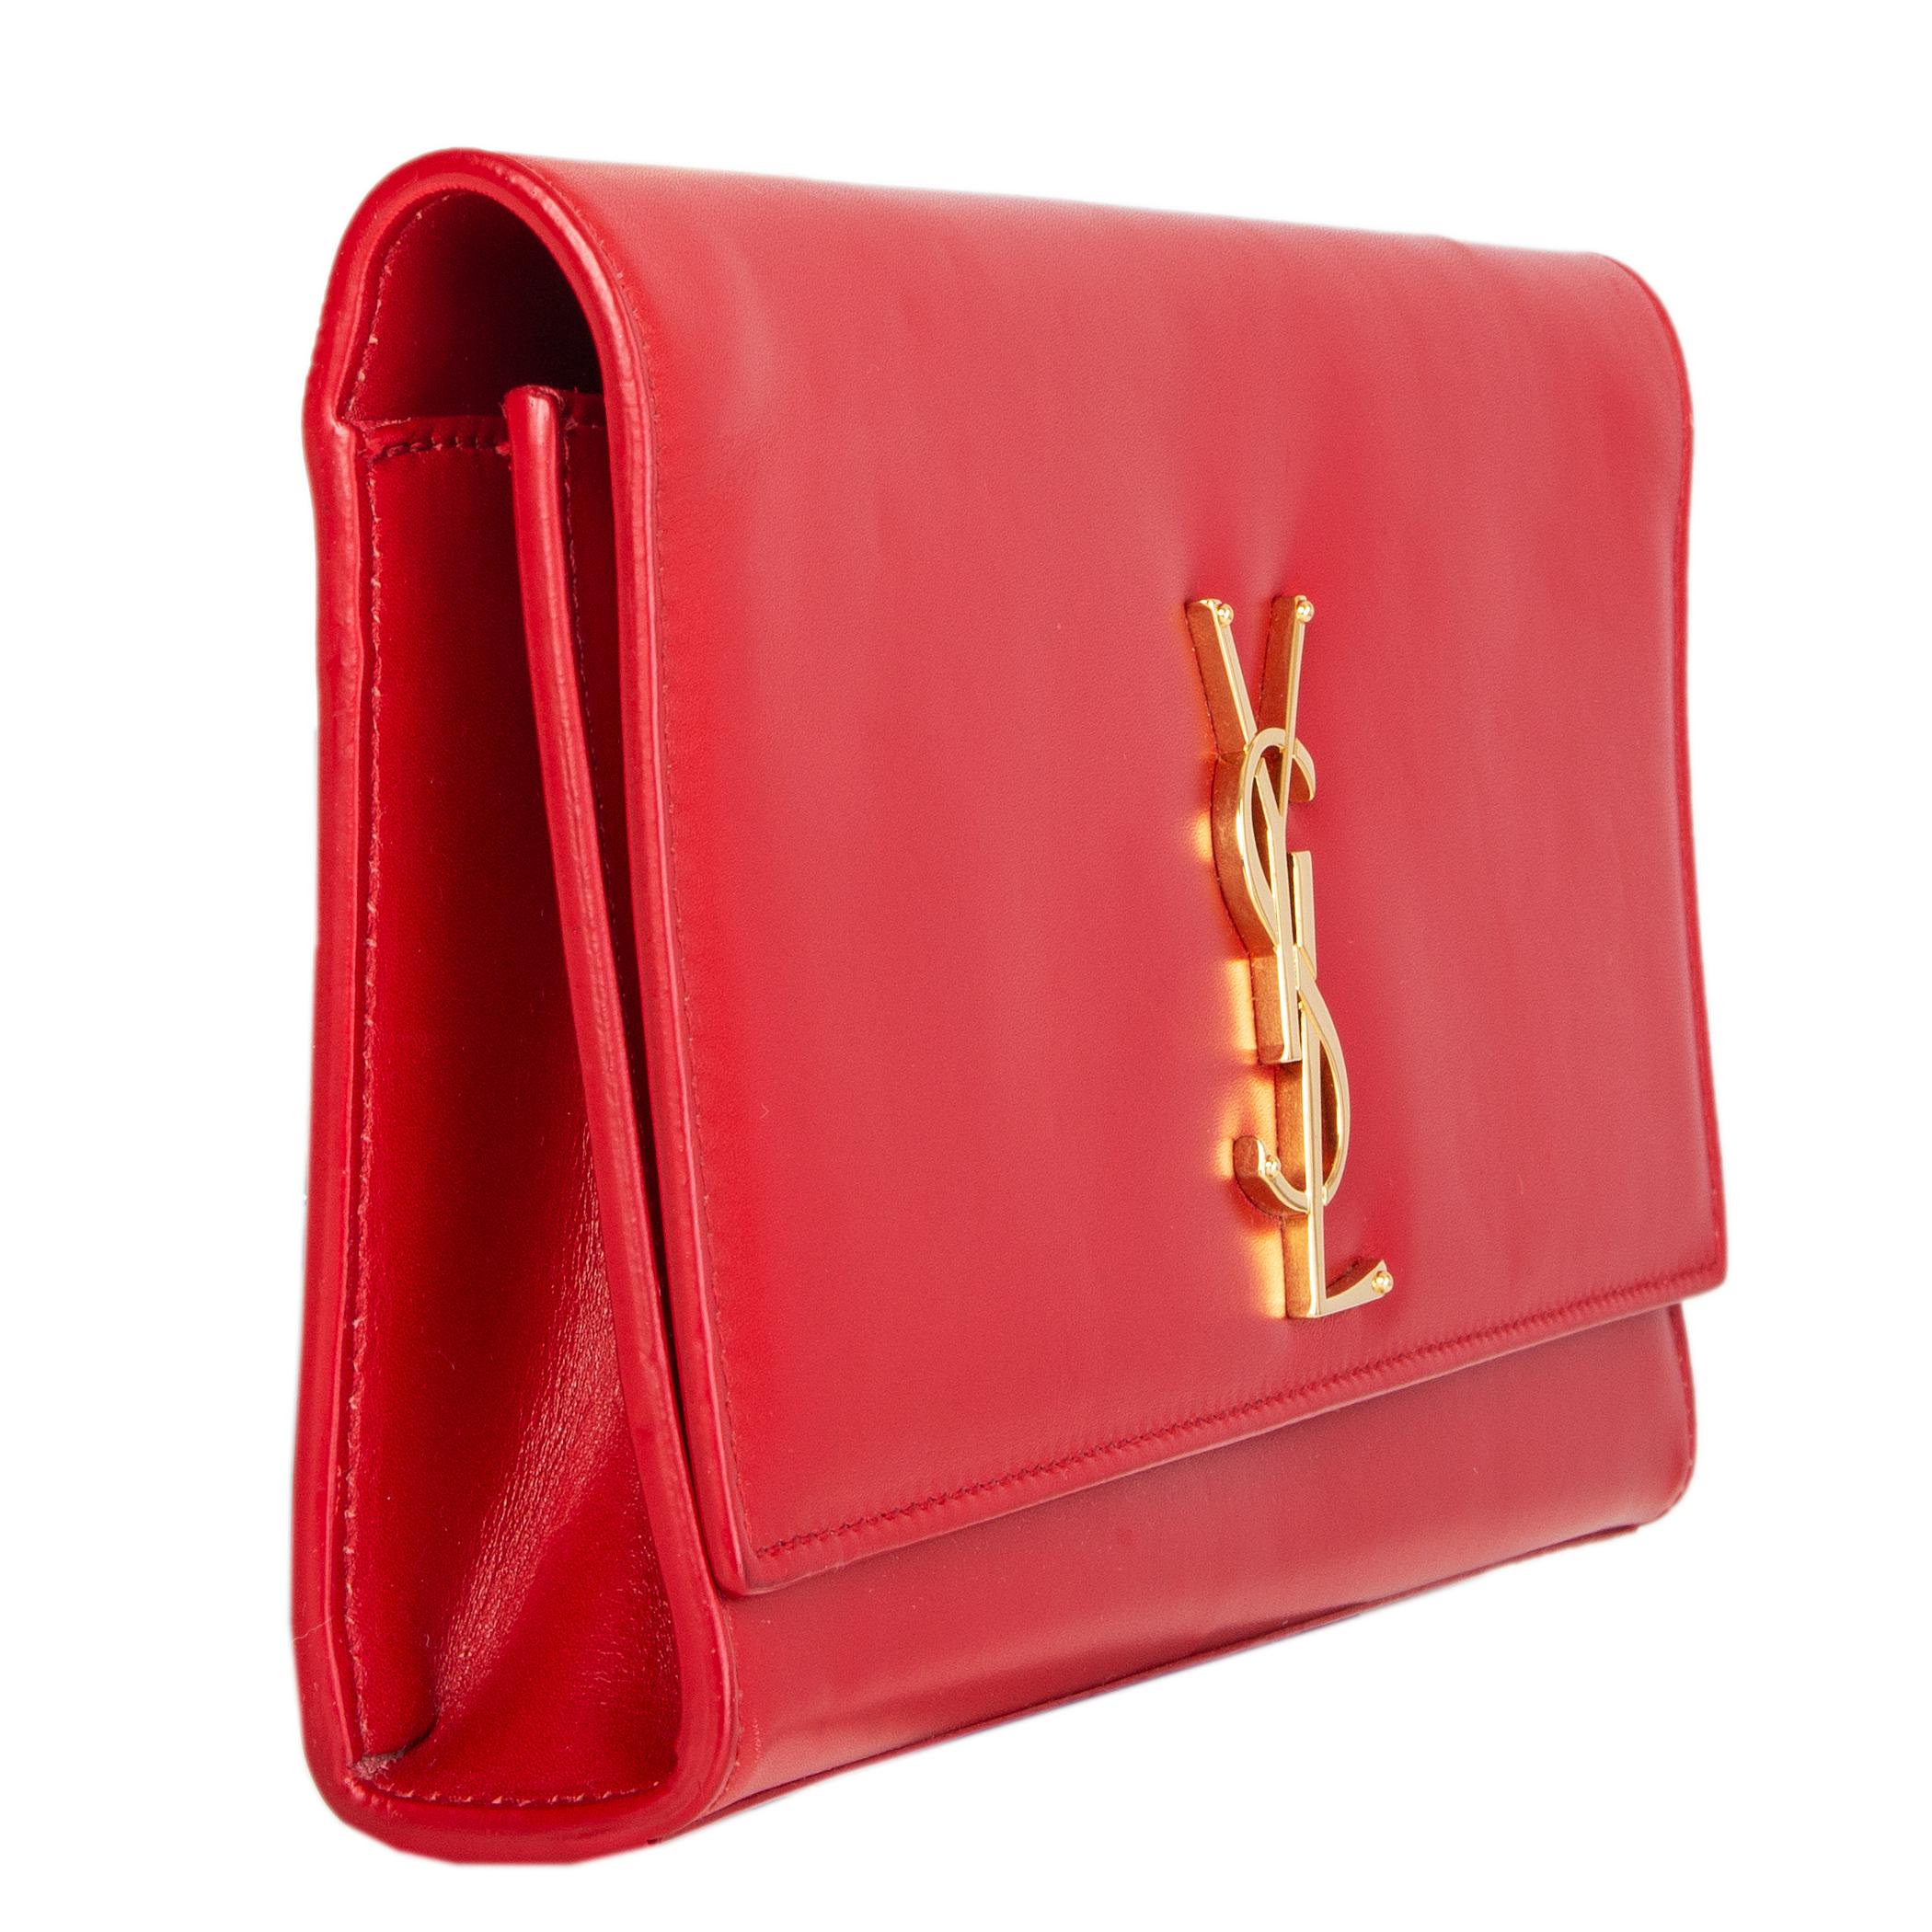 Saint Laurent 'Kate' flap clutch in red nappa leather with gold-tone YSL lettering and a linear silhouette. Opens with a magnetic button under the flap and is lined in red suede with one open pocket against the back. Has been carried and is in